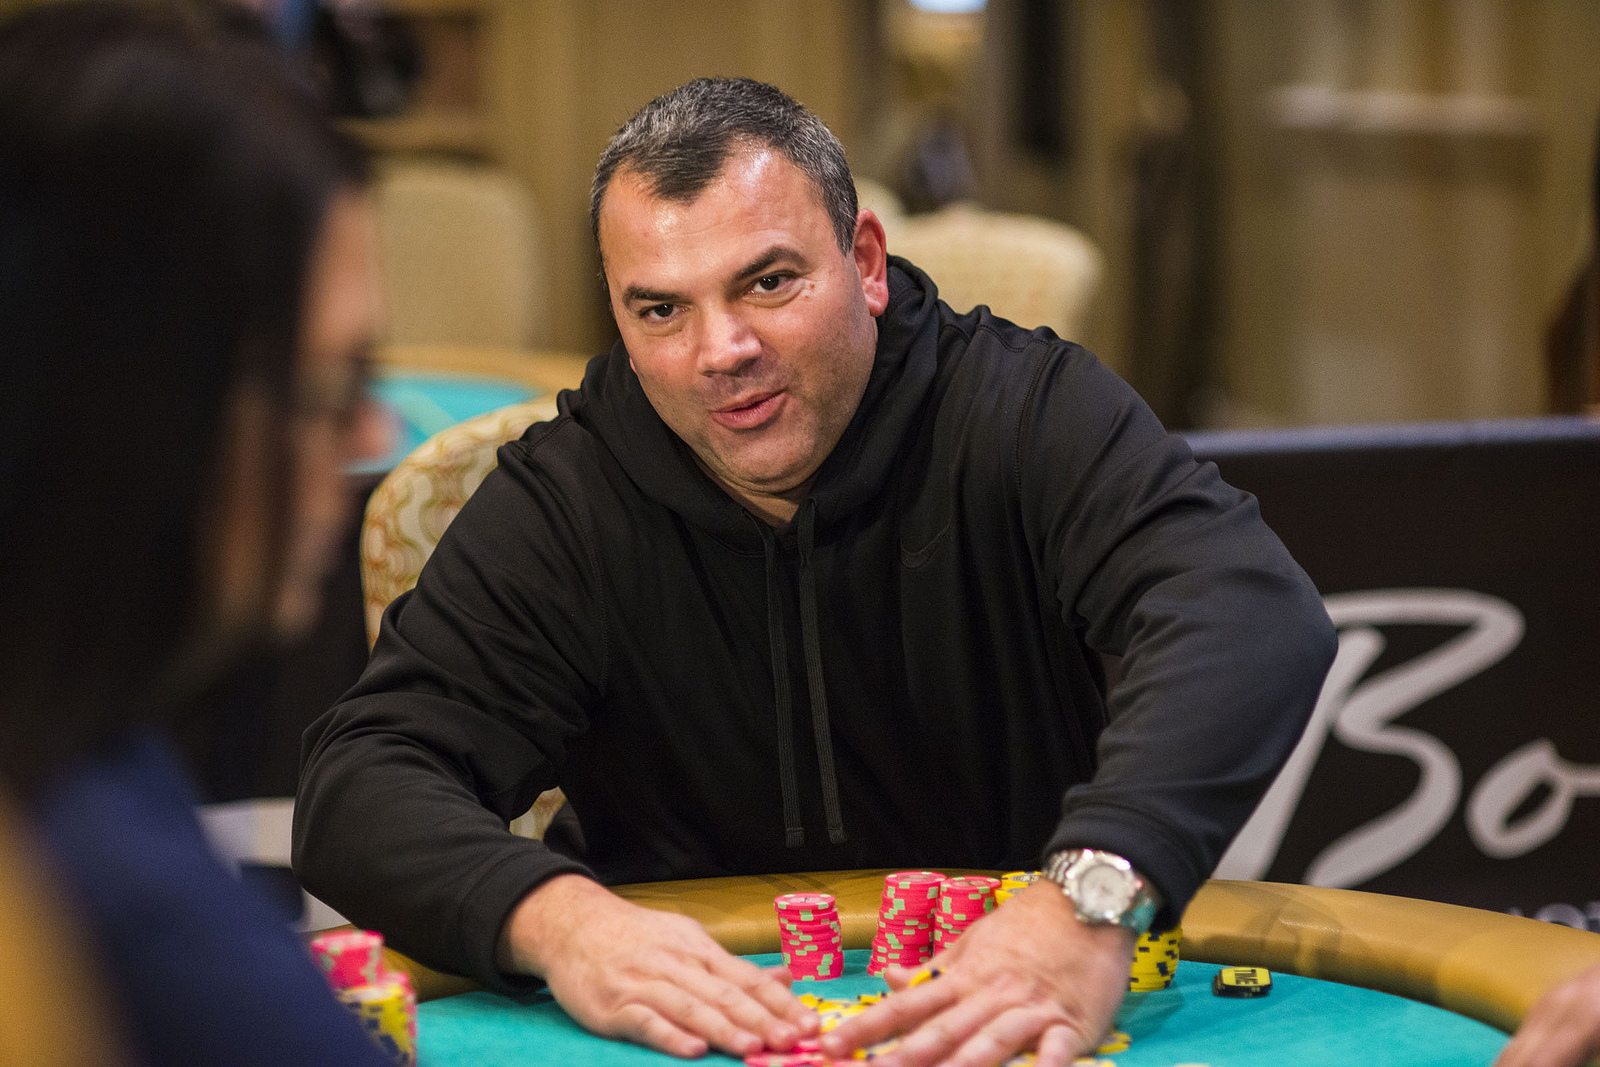 Dave Farah Leads Atlantic City’s WPT Borgata with 6 Players Left, Final Table Shift to Las Vegas in March